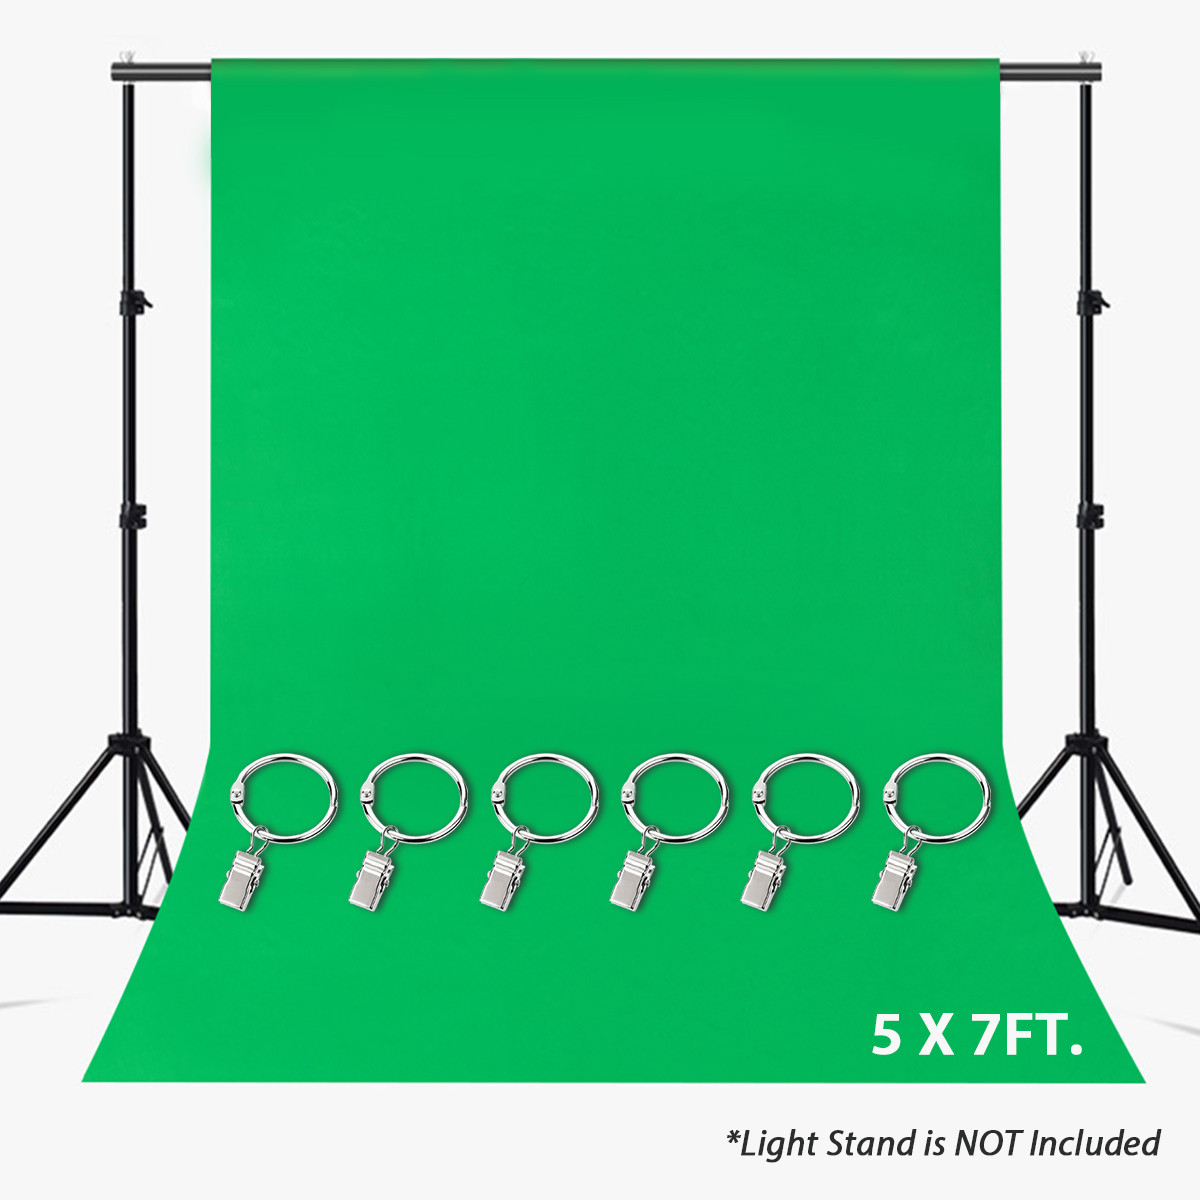 7x5FT-Green-Photography-Backdrop-Background-Studio-Photography-Prop-1632882-1